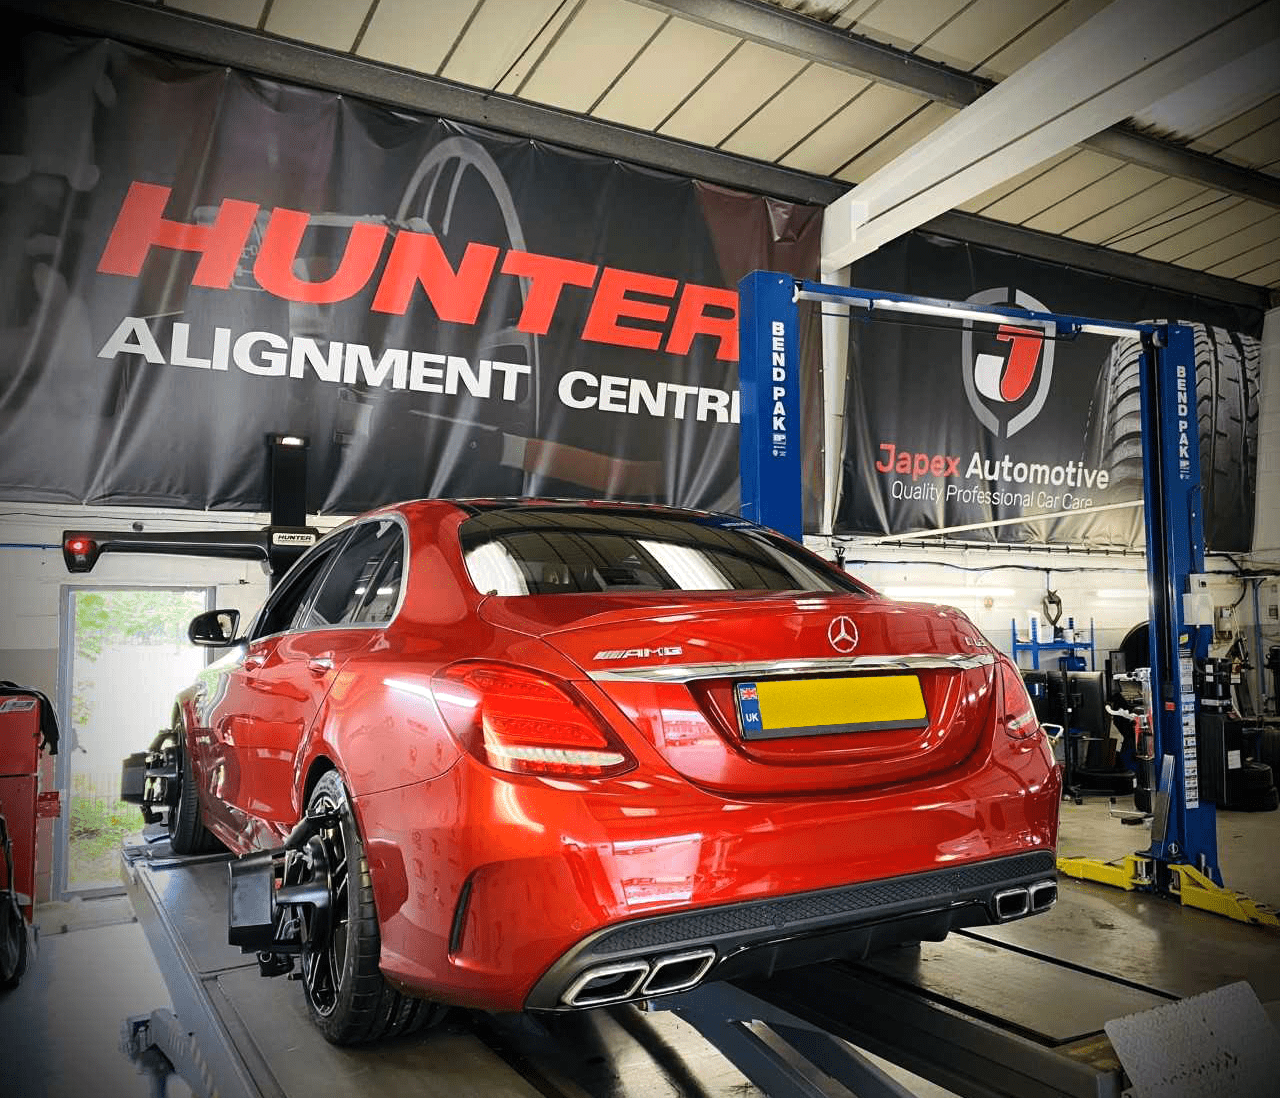 Image shows a red car facing away from us, on a wheel alignmenment ramp with a large black poster that says "Hunter Alignment Centre" on it.